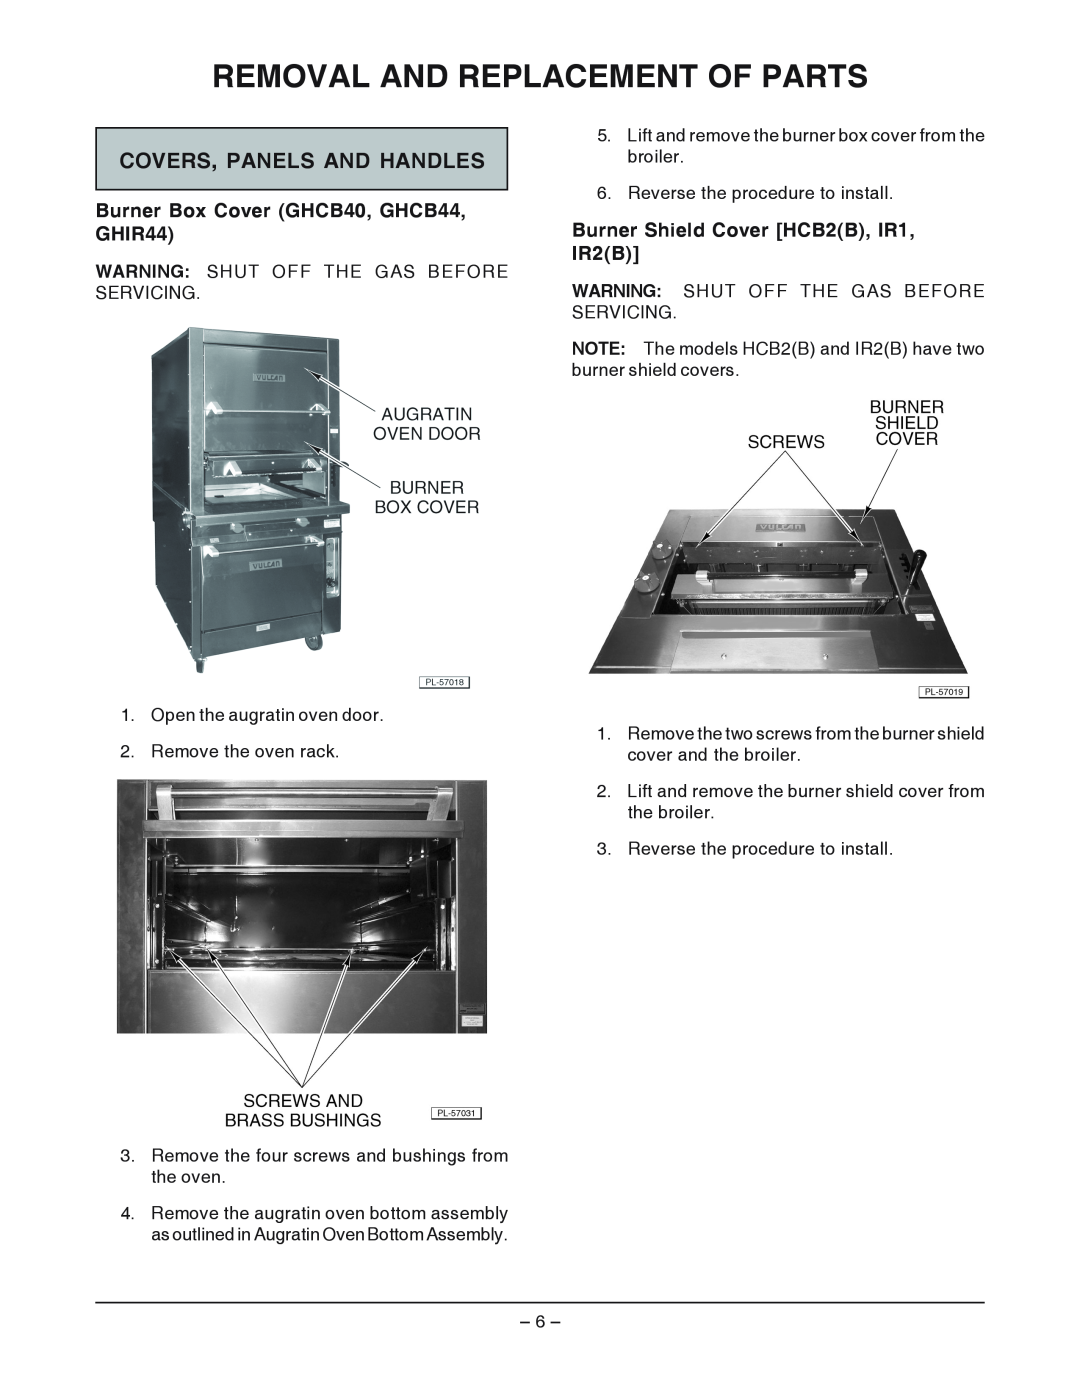 Vulcan-Hart ML-52201 Removal And Replacement Of Parts, Covers, Panels And Handles, Burner Box Cover GHCB40, GHCB44, GHIR44 